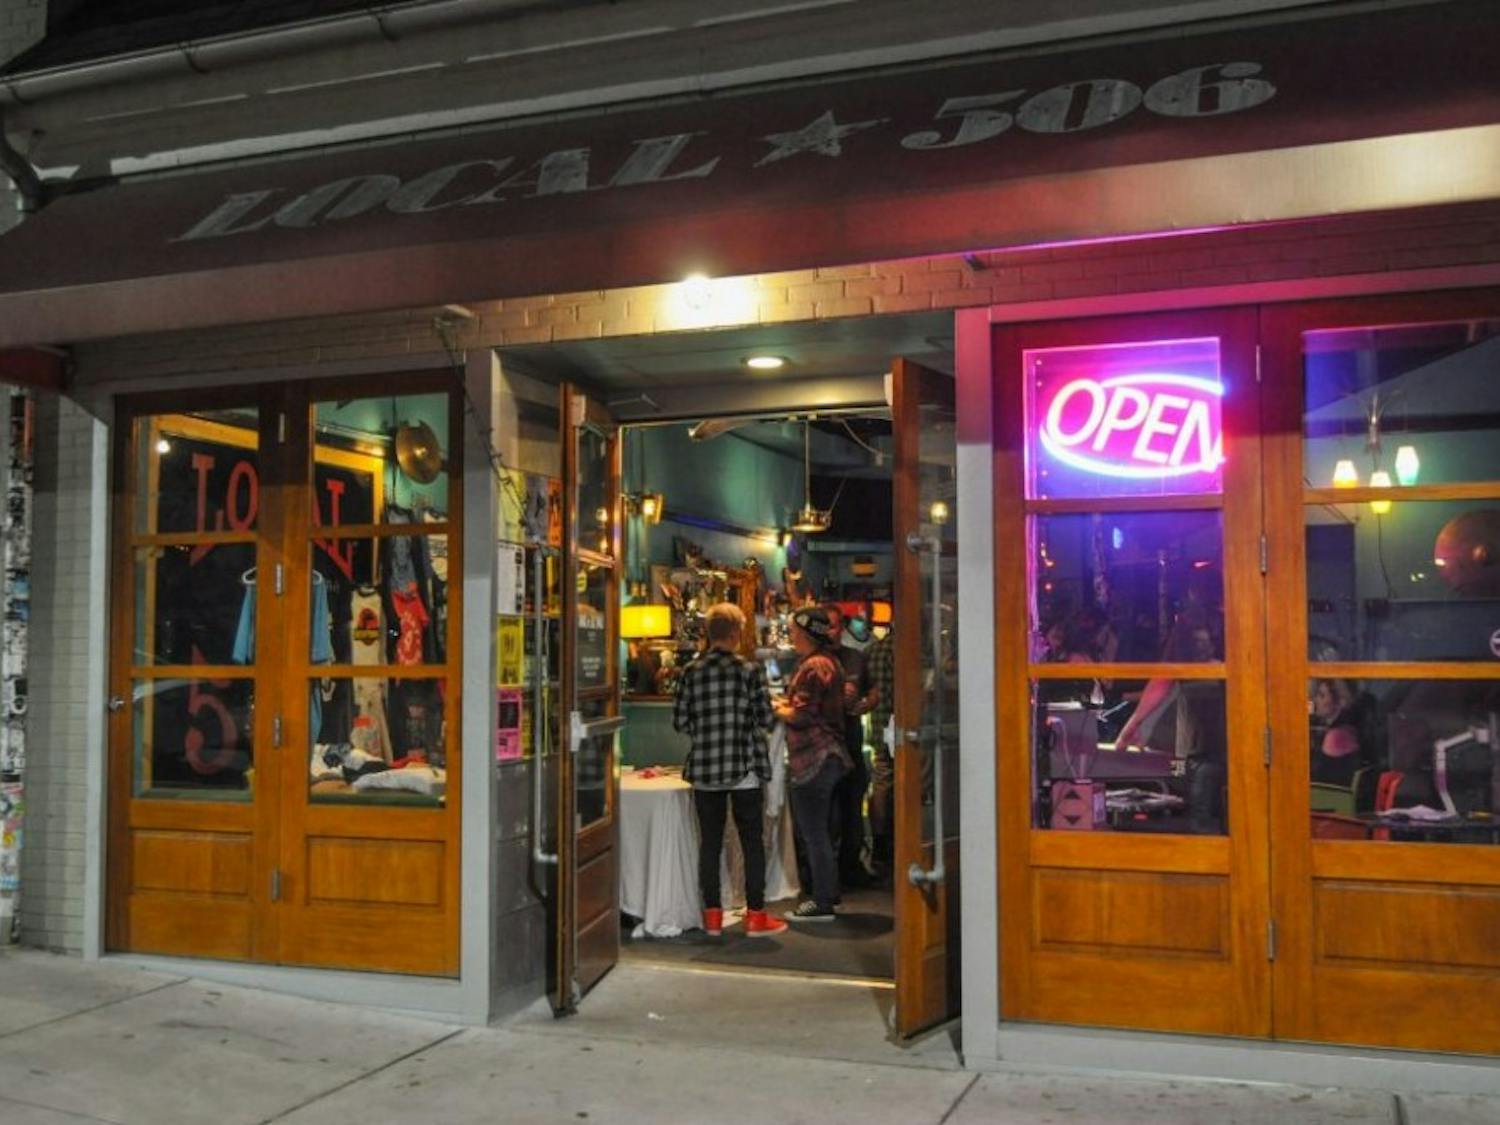 Local 506, located on 506 West Franklin Street, is a music bar that hosts touring musicians and local bands. Photo courtesy of Evan Millican.